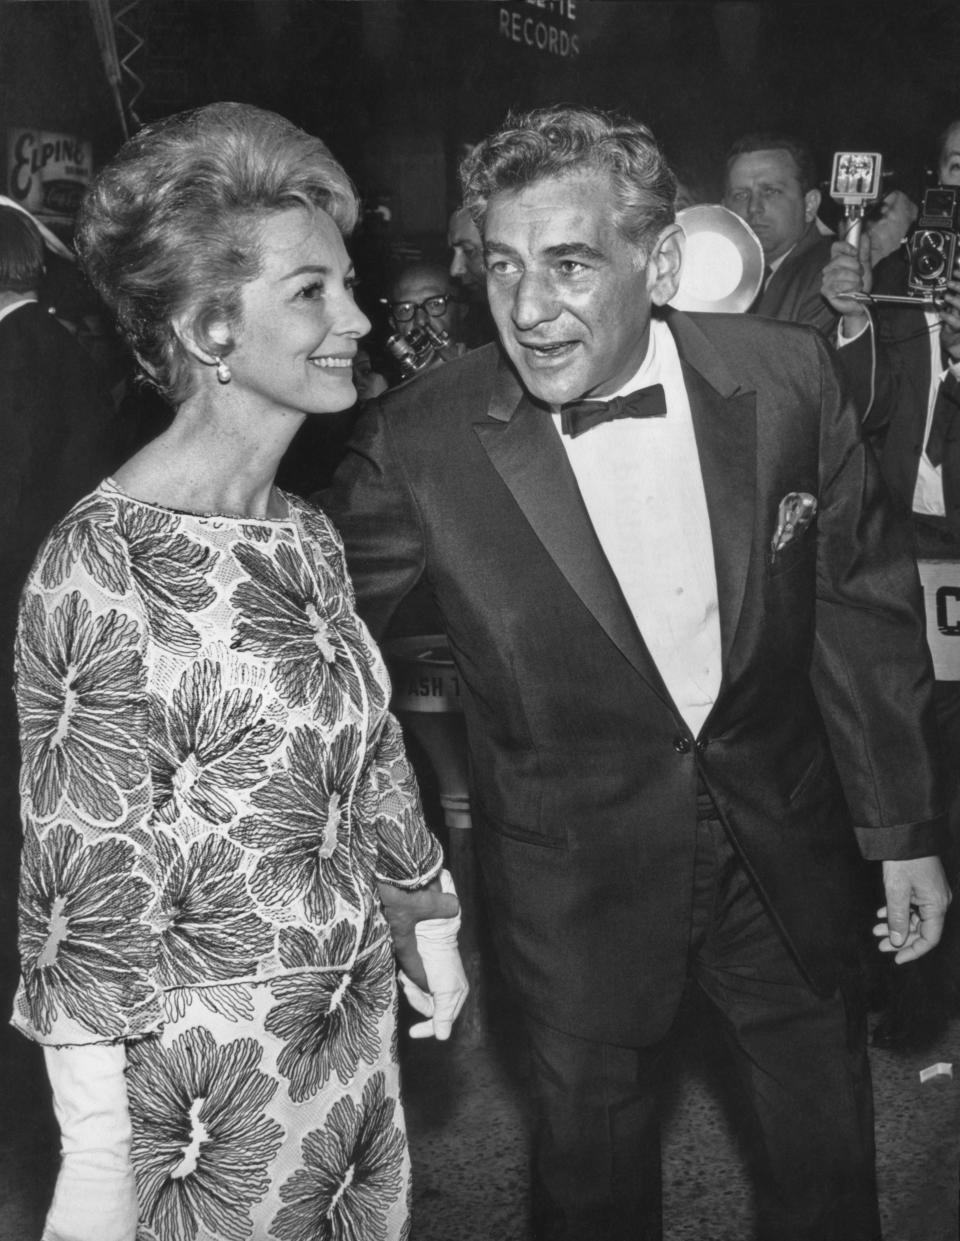 American composer and conductor Leonard Bernstein (1918 - 1990) and his wife actress Felicia Montealegre (1922 - 1978) at the New York film premiere of 'Cleopatra' on June 12, 1963. (Photo by Pictorial Parade/Archive Photos/Getty Images)